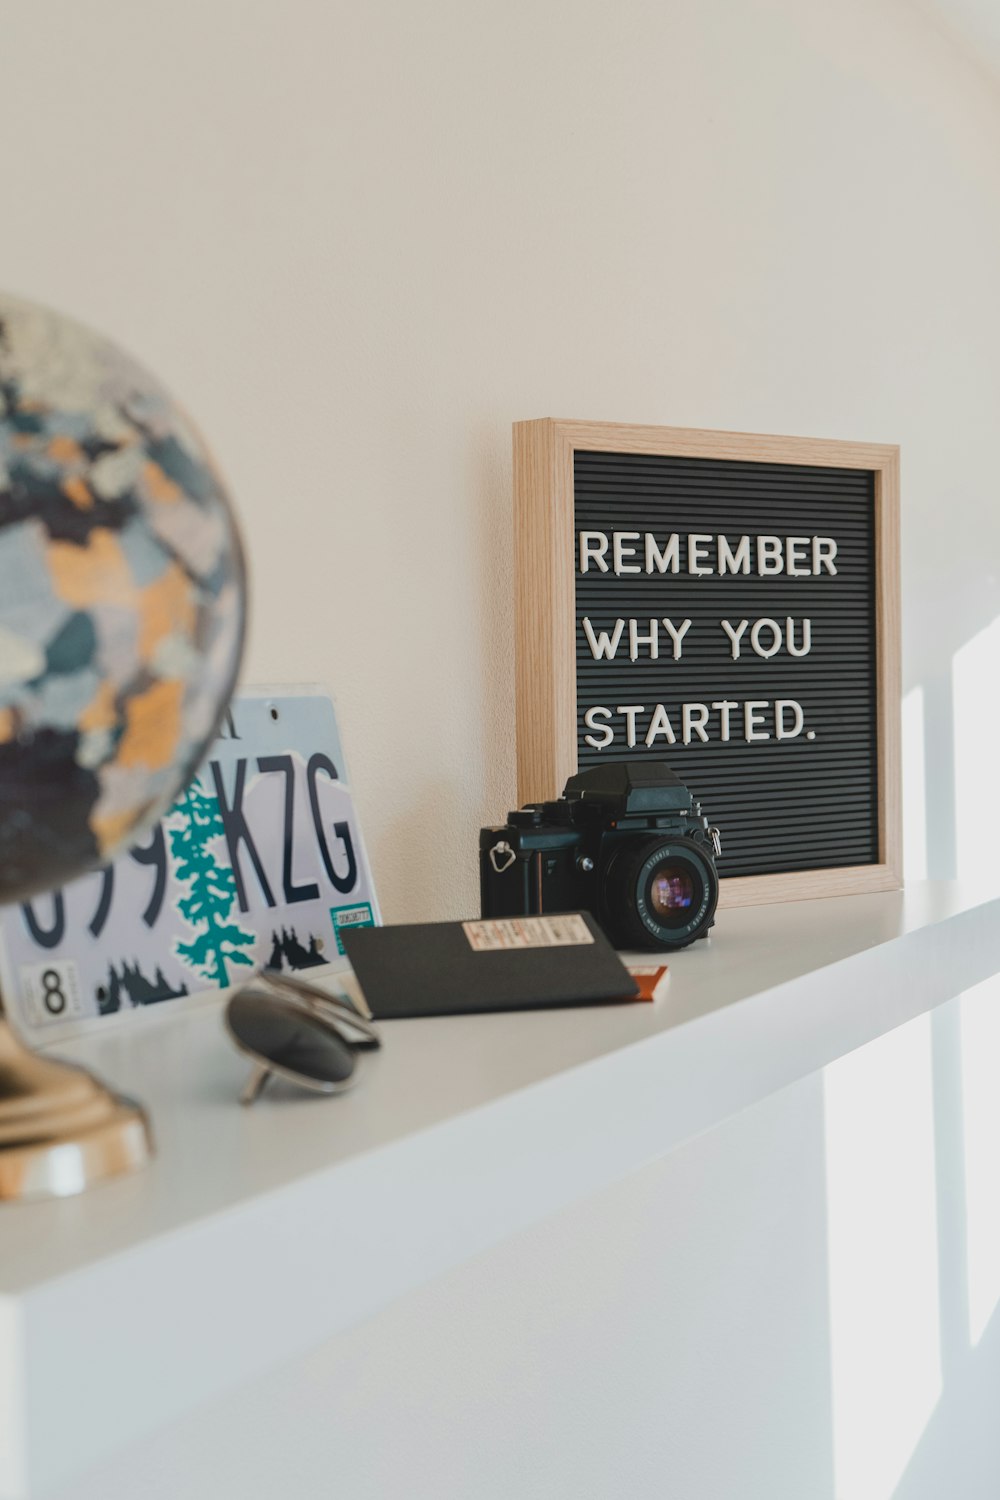 shallow focus photo of black SLR camera on white wooden shelf with a sign reading "remember why you started"